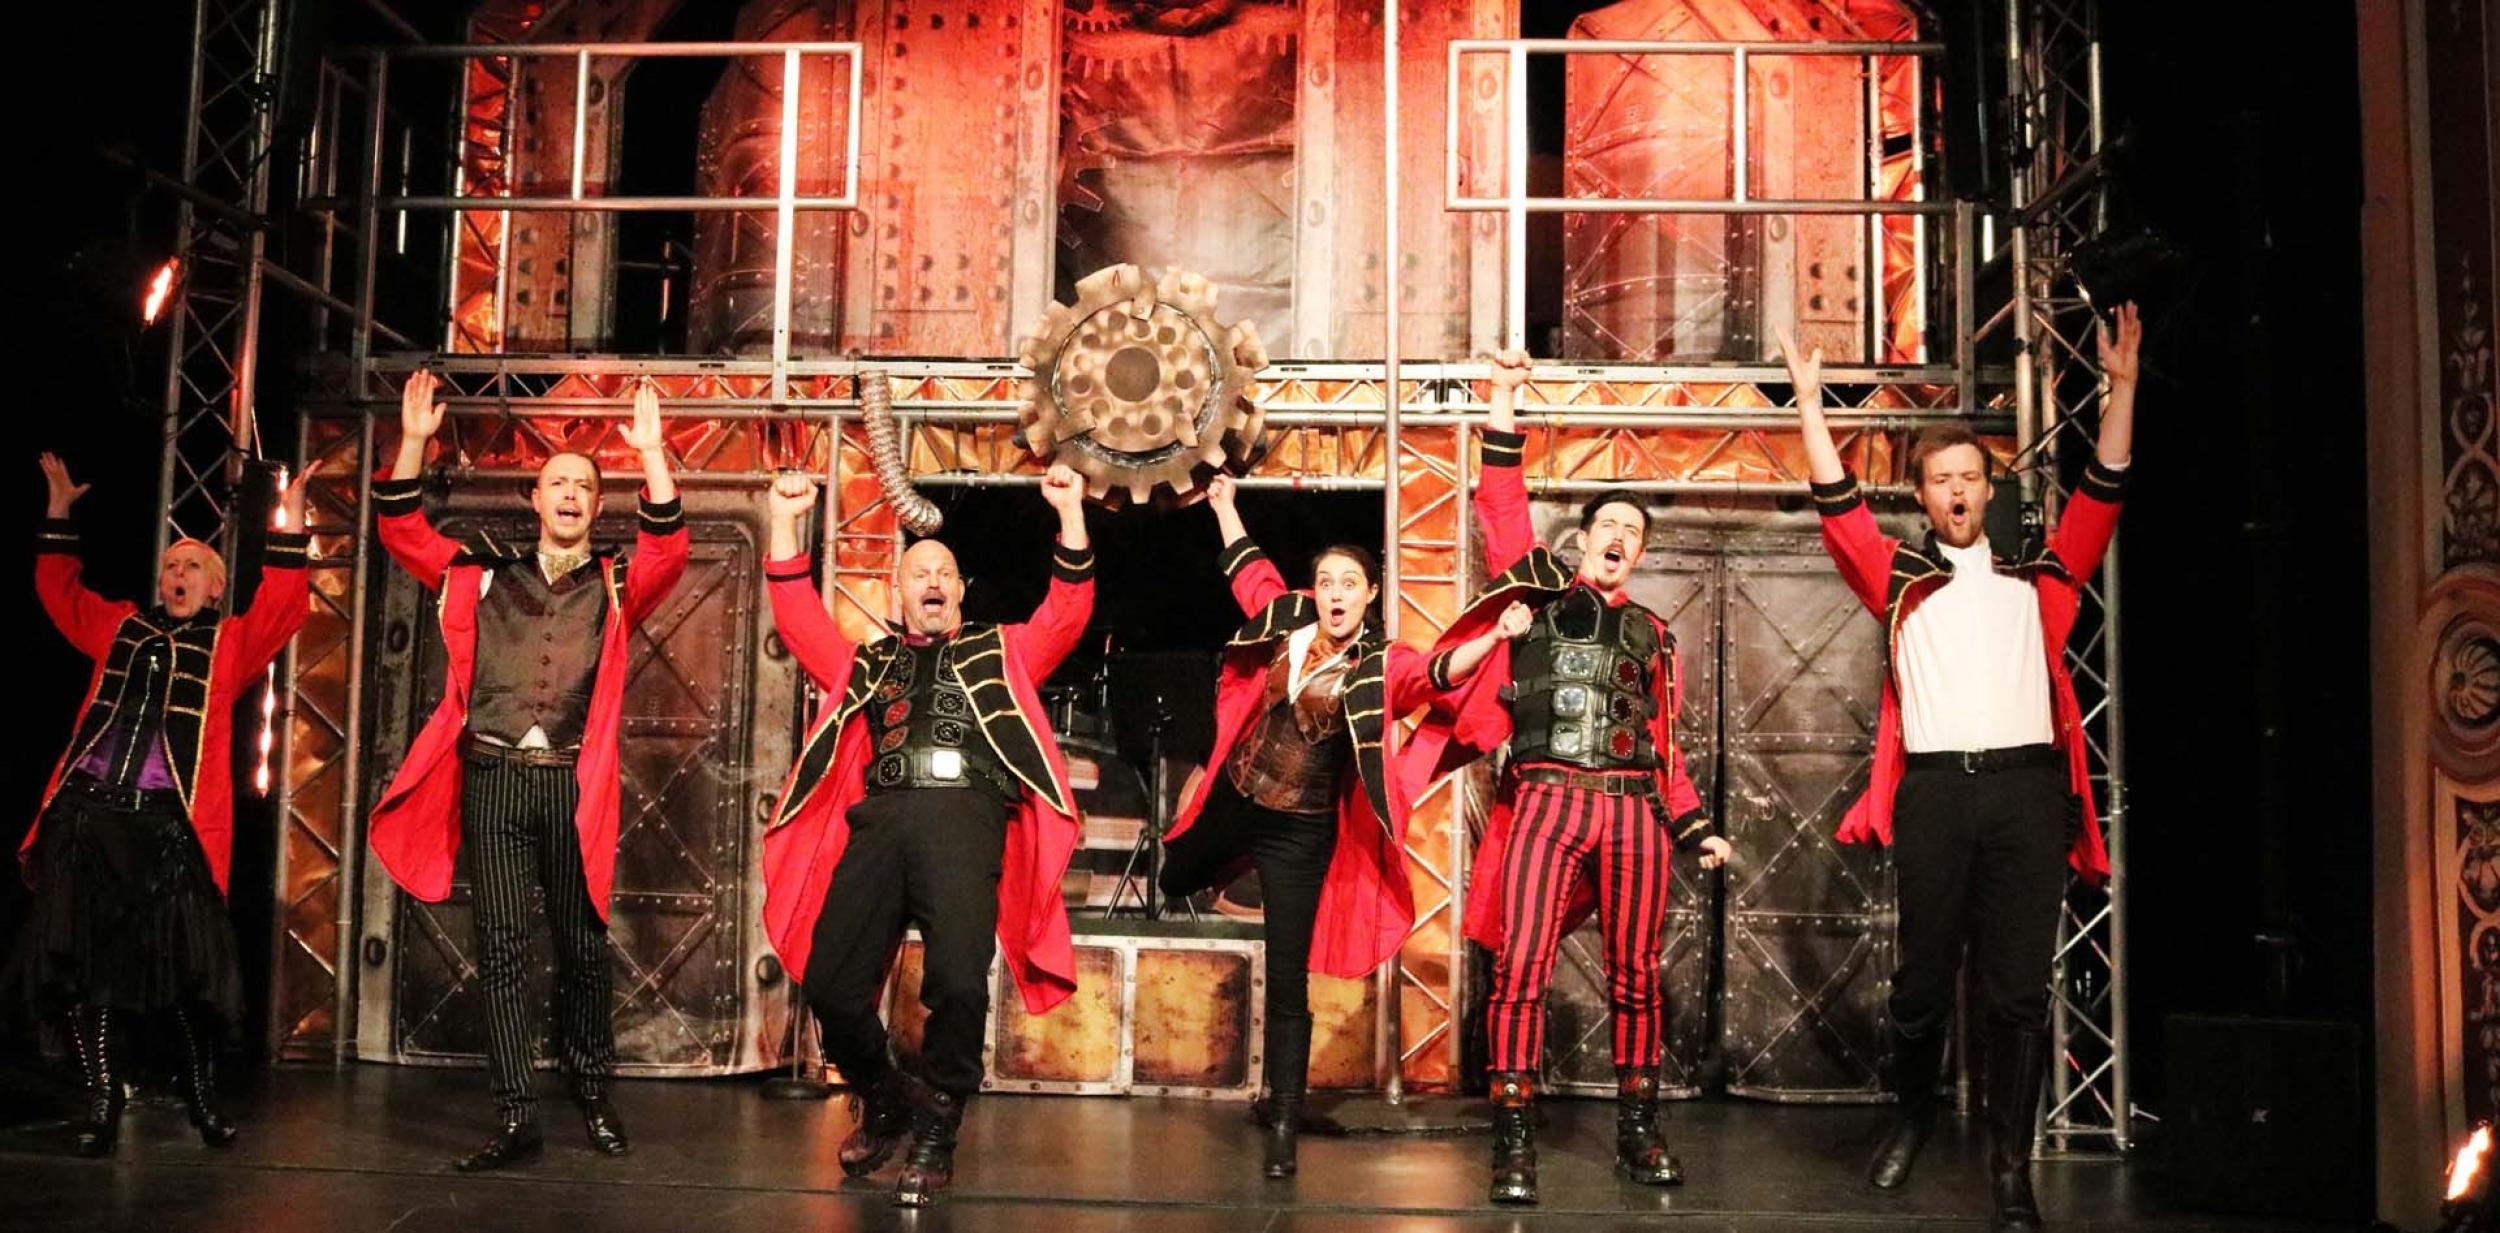 Six actors in red and black uniforms on stage looking animated